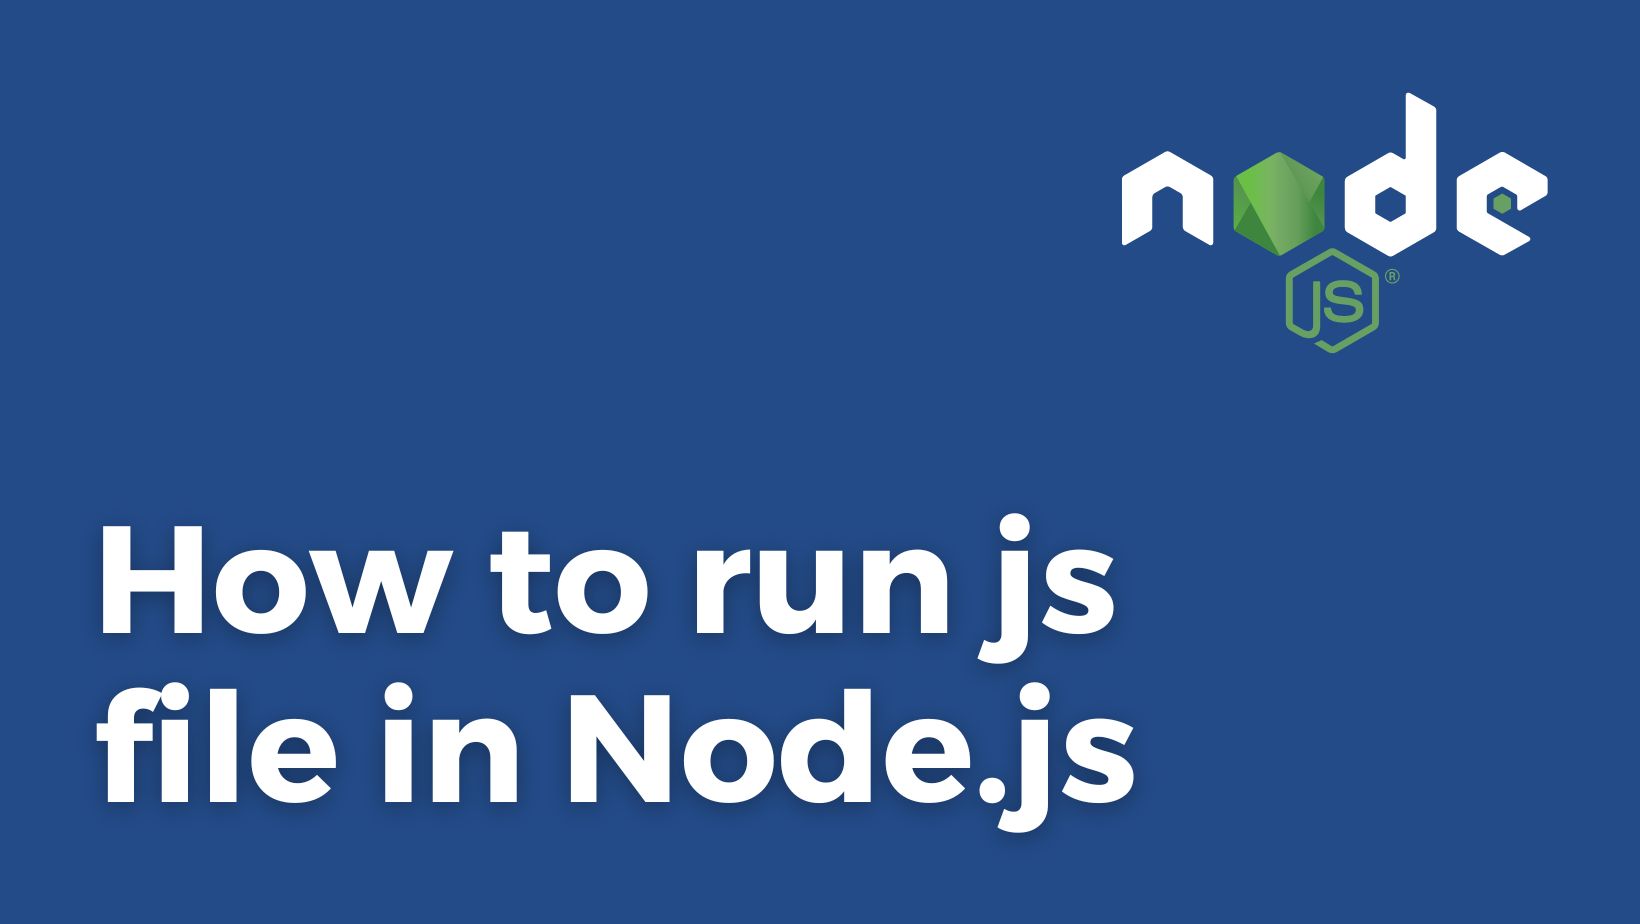 How to run js file in Node.js